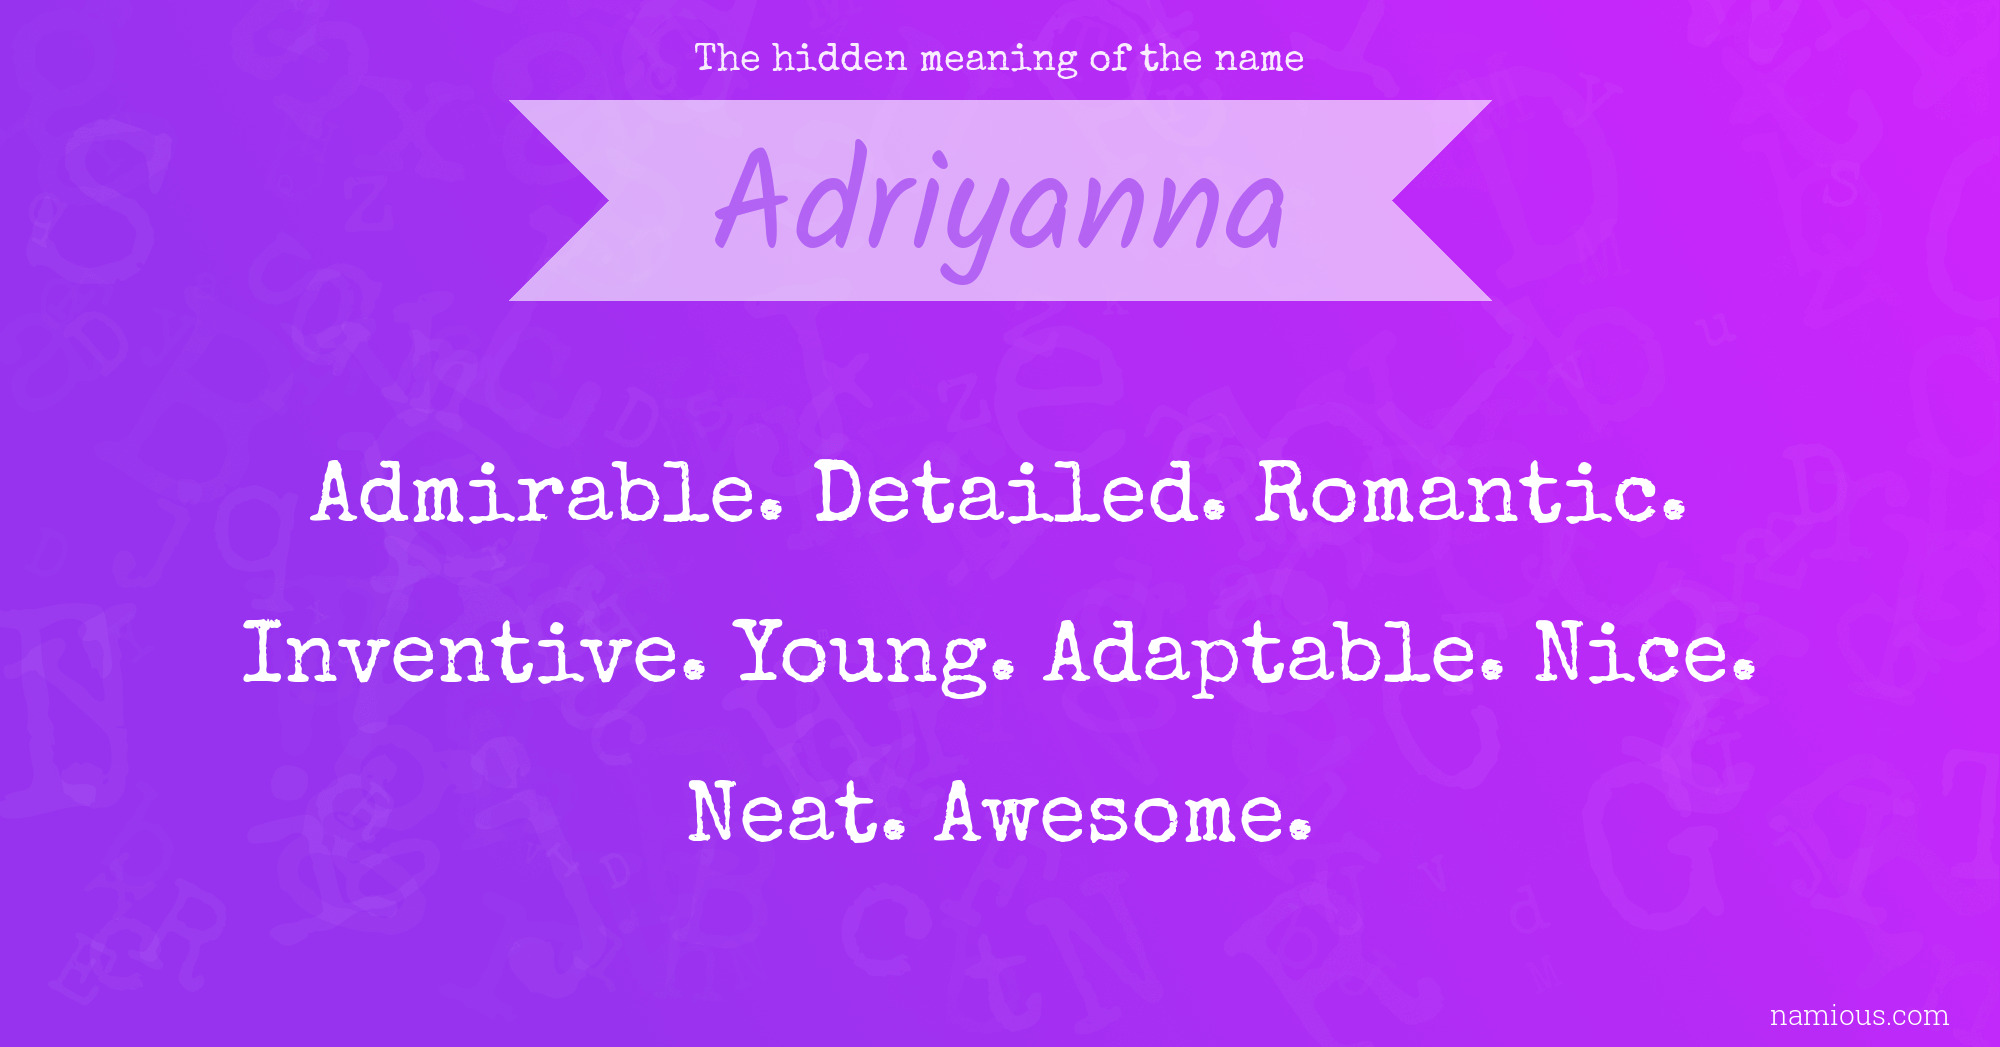 The hidden meaning of the name Adriyanna